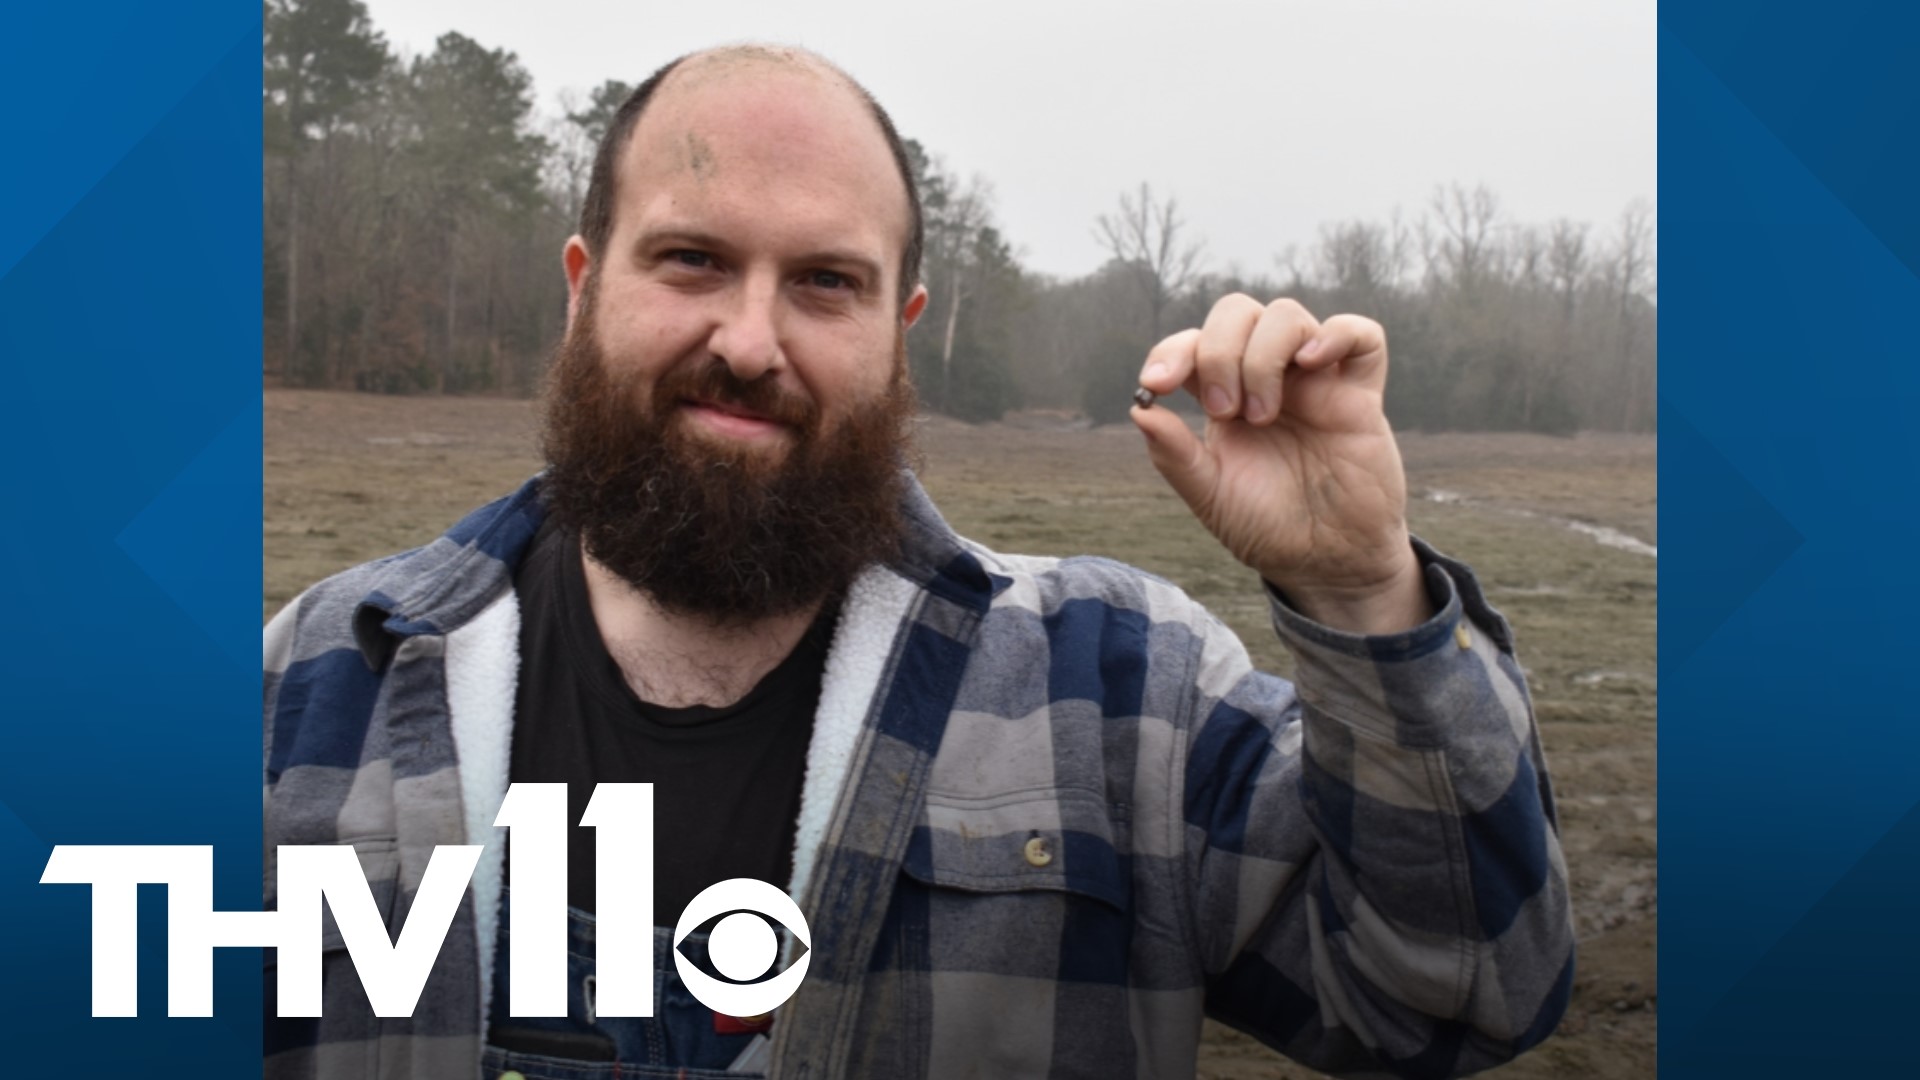 Julien Navas of Paris, France, discovered a 7.46-carat diamond during his first-ever visit to Arkansas’s Crater of Diamonds State Park on Thursday, January 11.